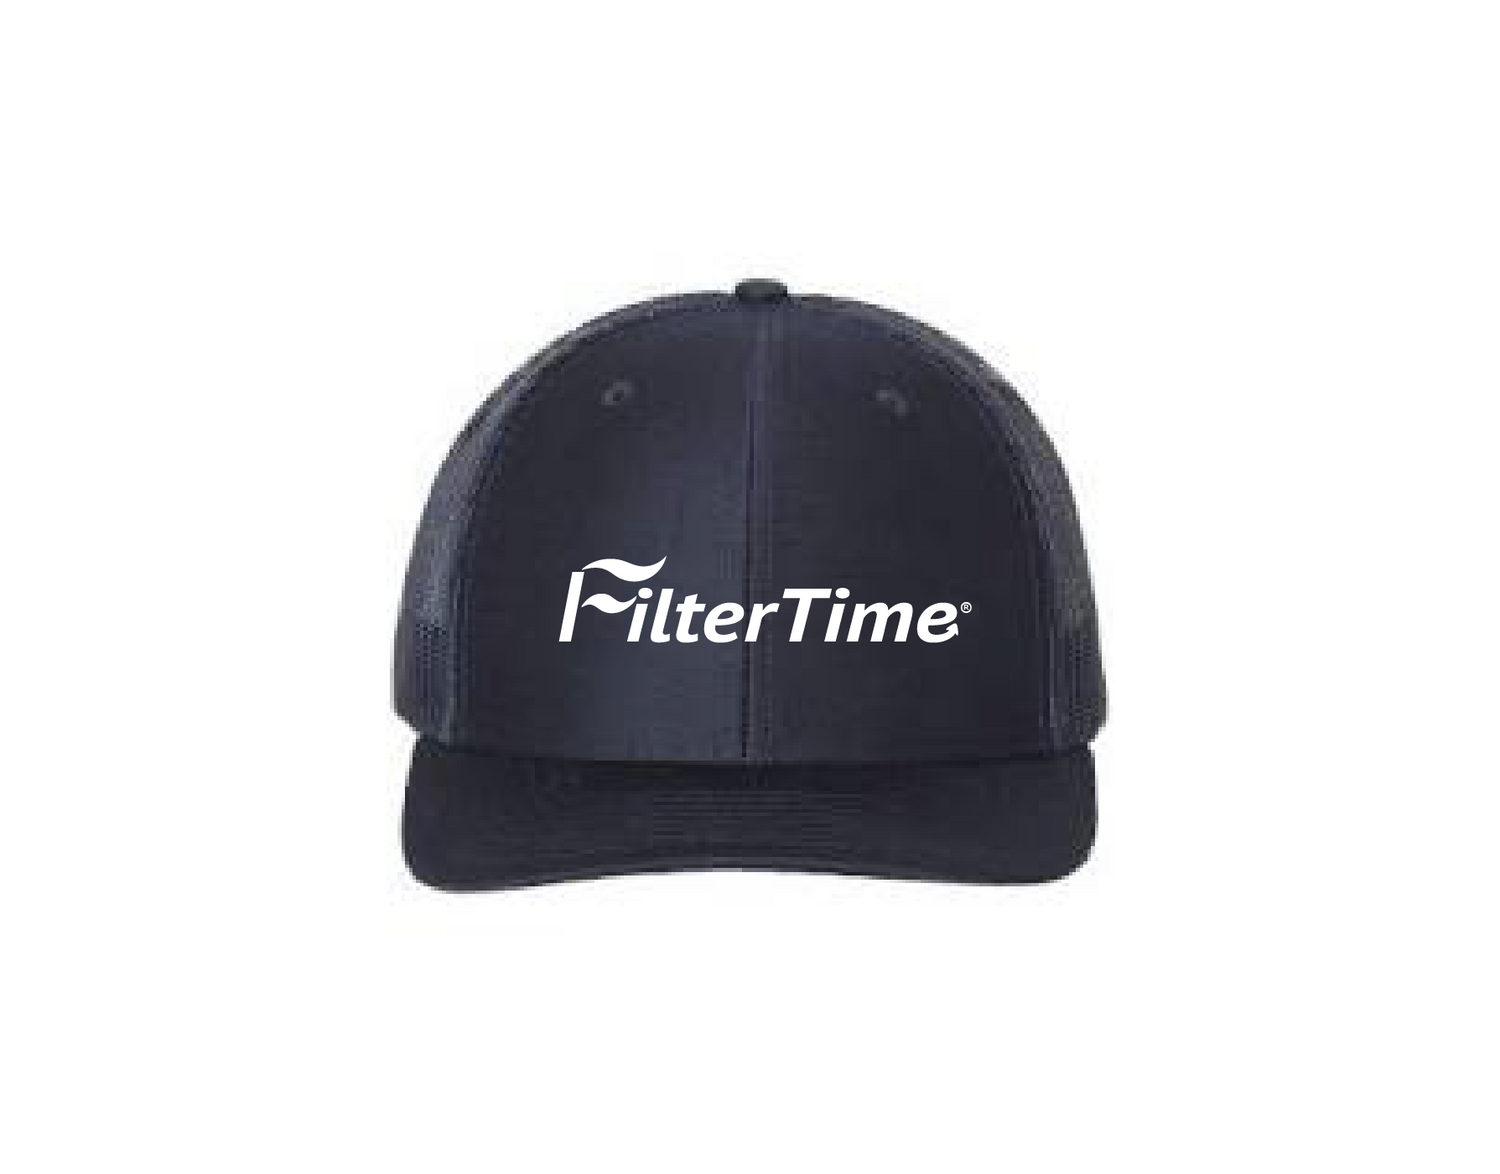 FilterTime Hats